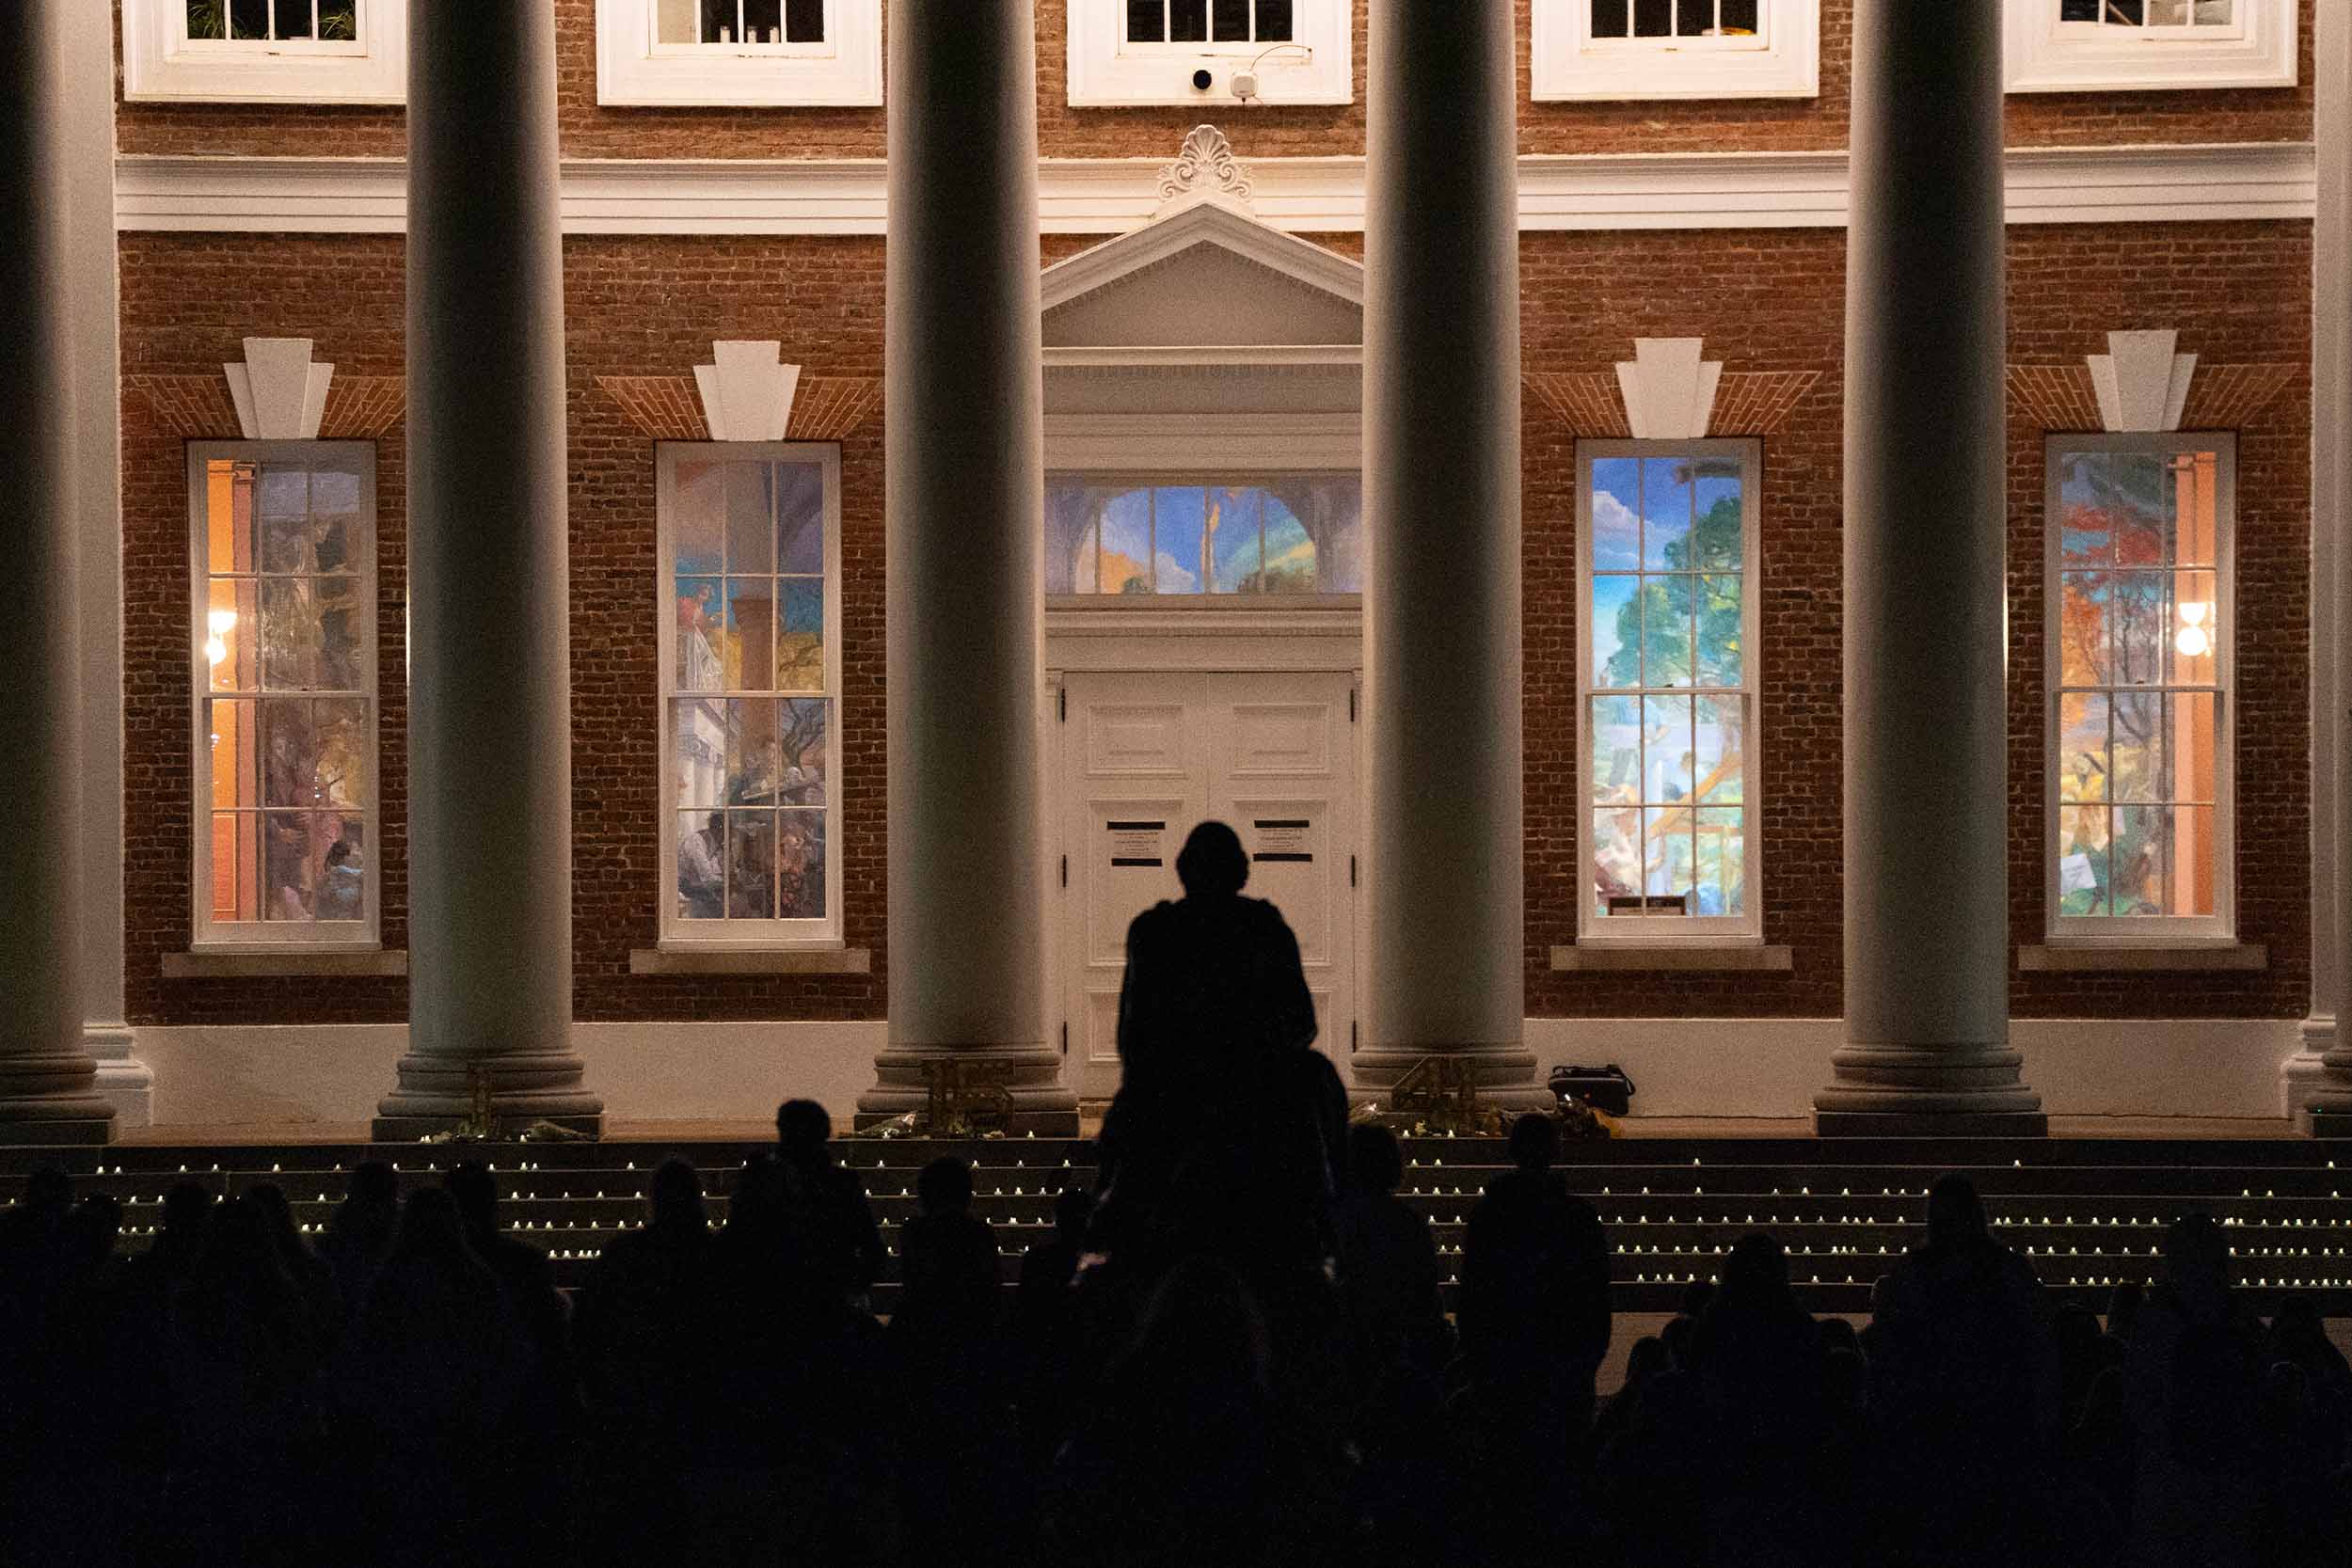 A view from behind the gathering of students and university community looking upon Old Cabell Hall during the candlelit memorial service